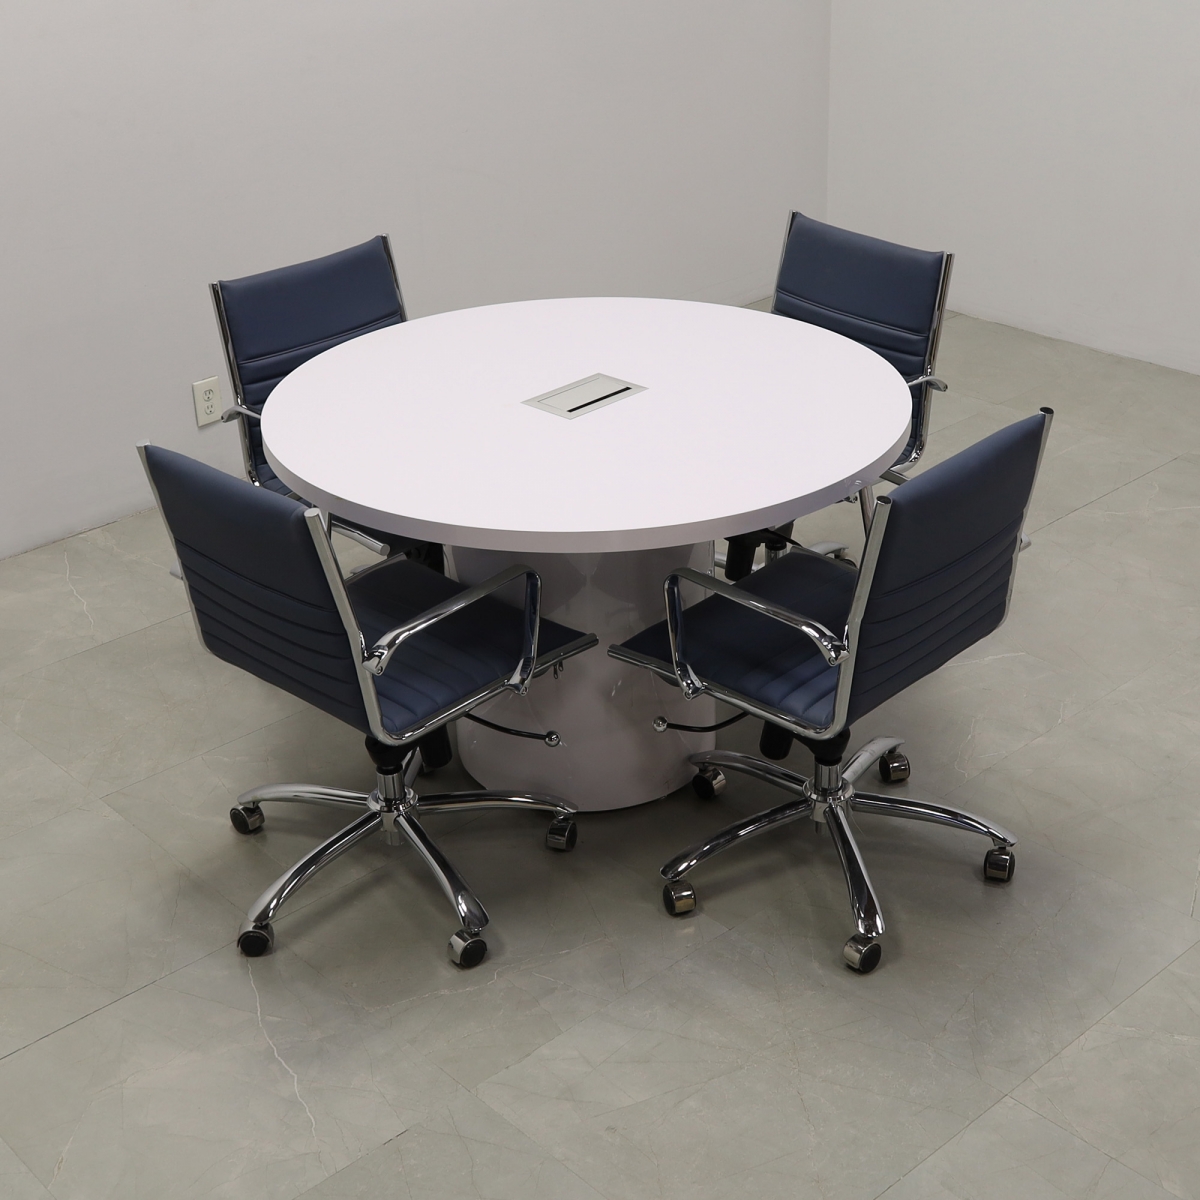 Newton Round Conference Table in White Gloss Laminate Top - 48 In. - Stock #42